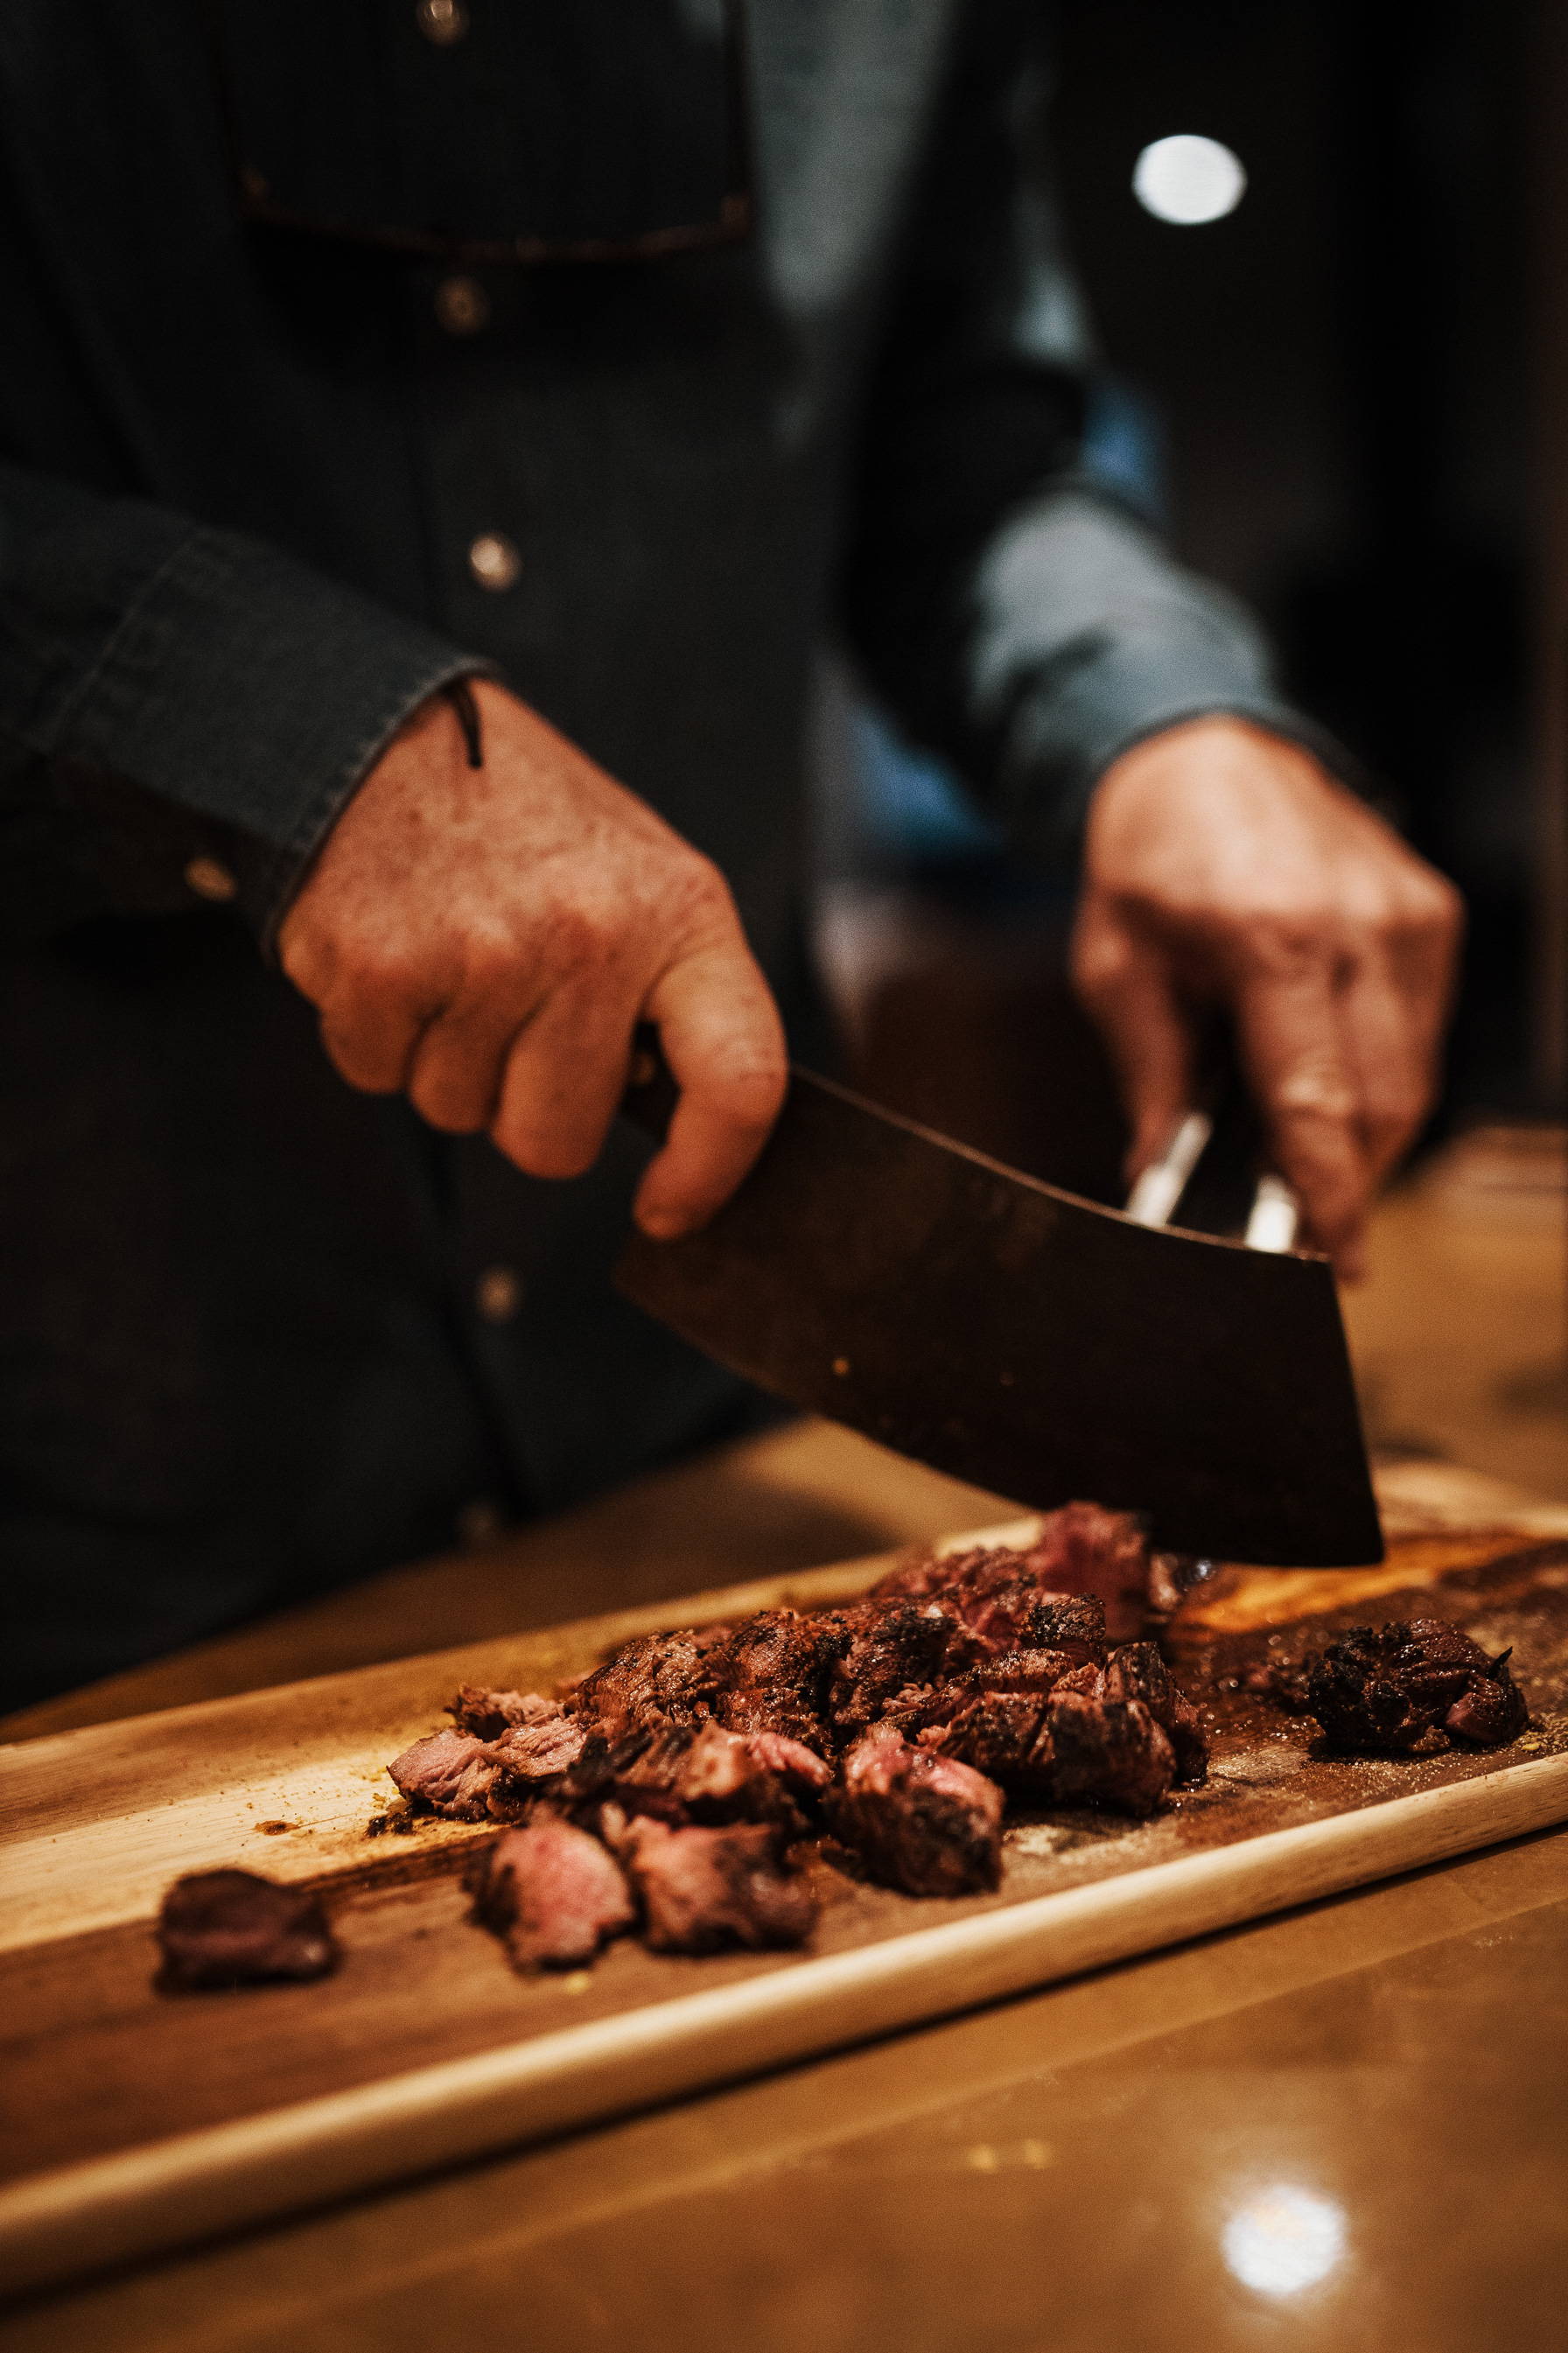 A man's hands cutting meat on a wooden cutting board.